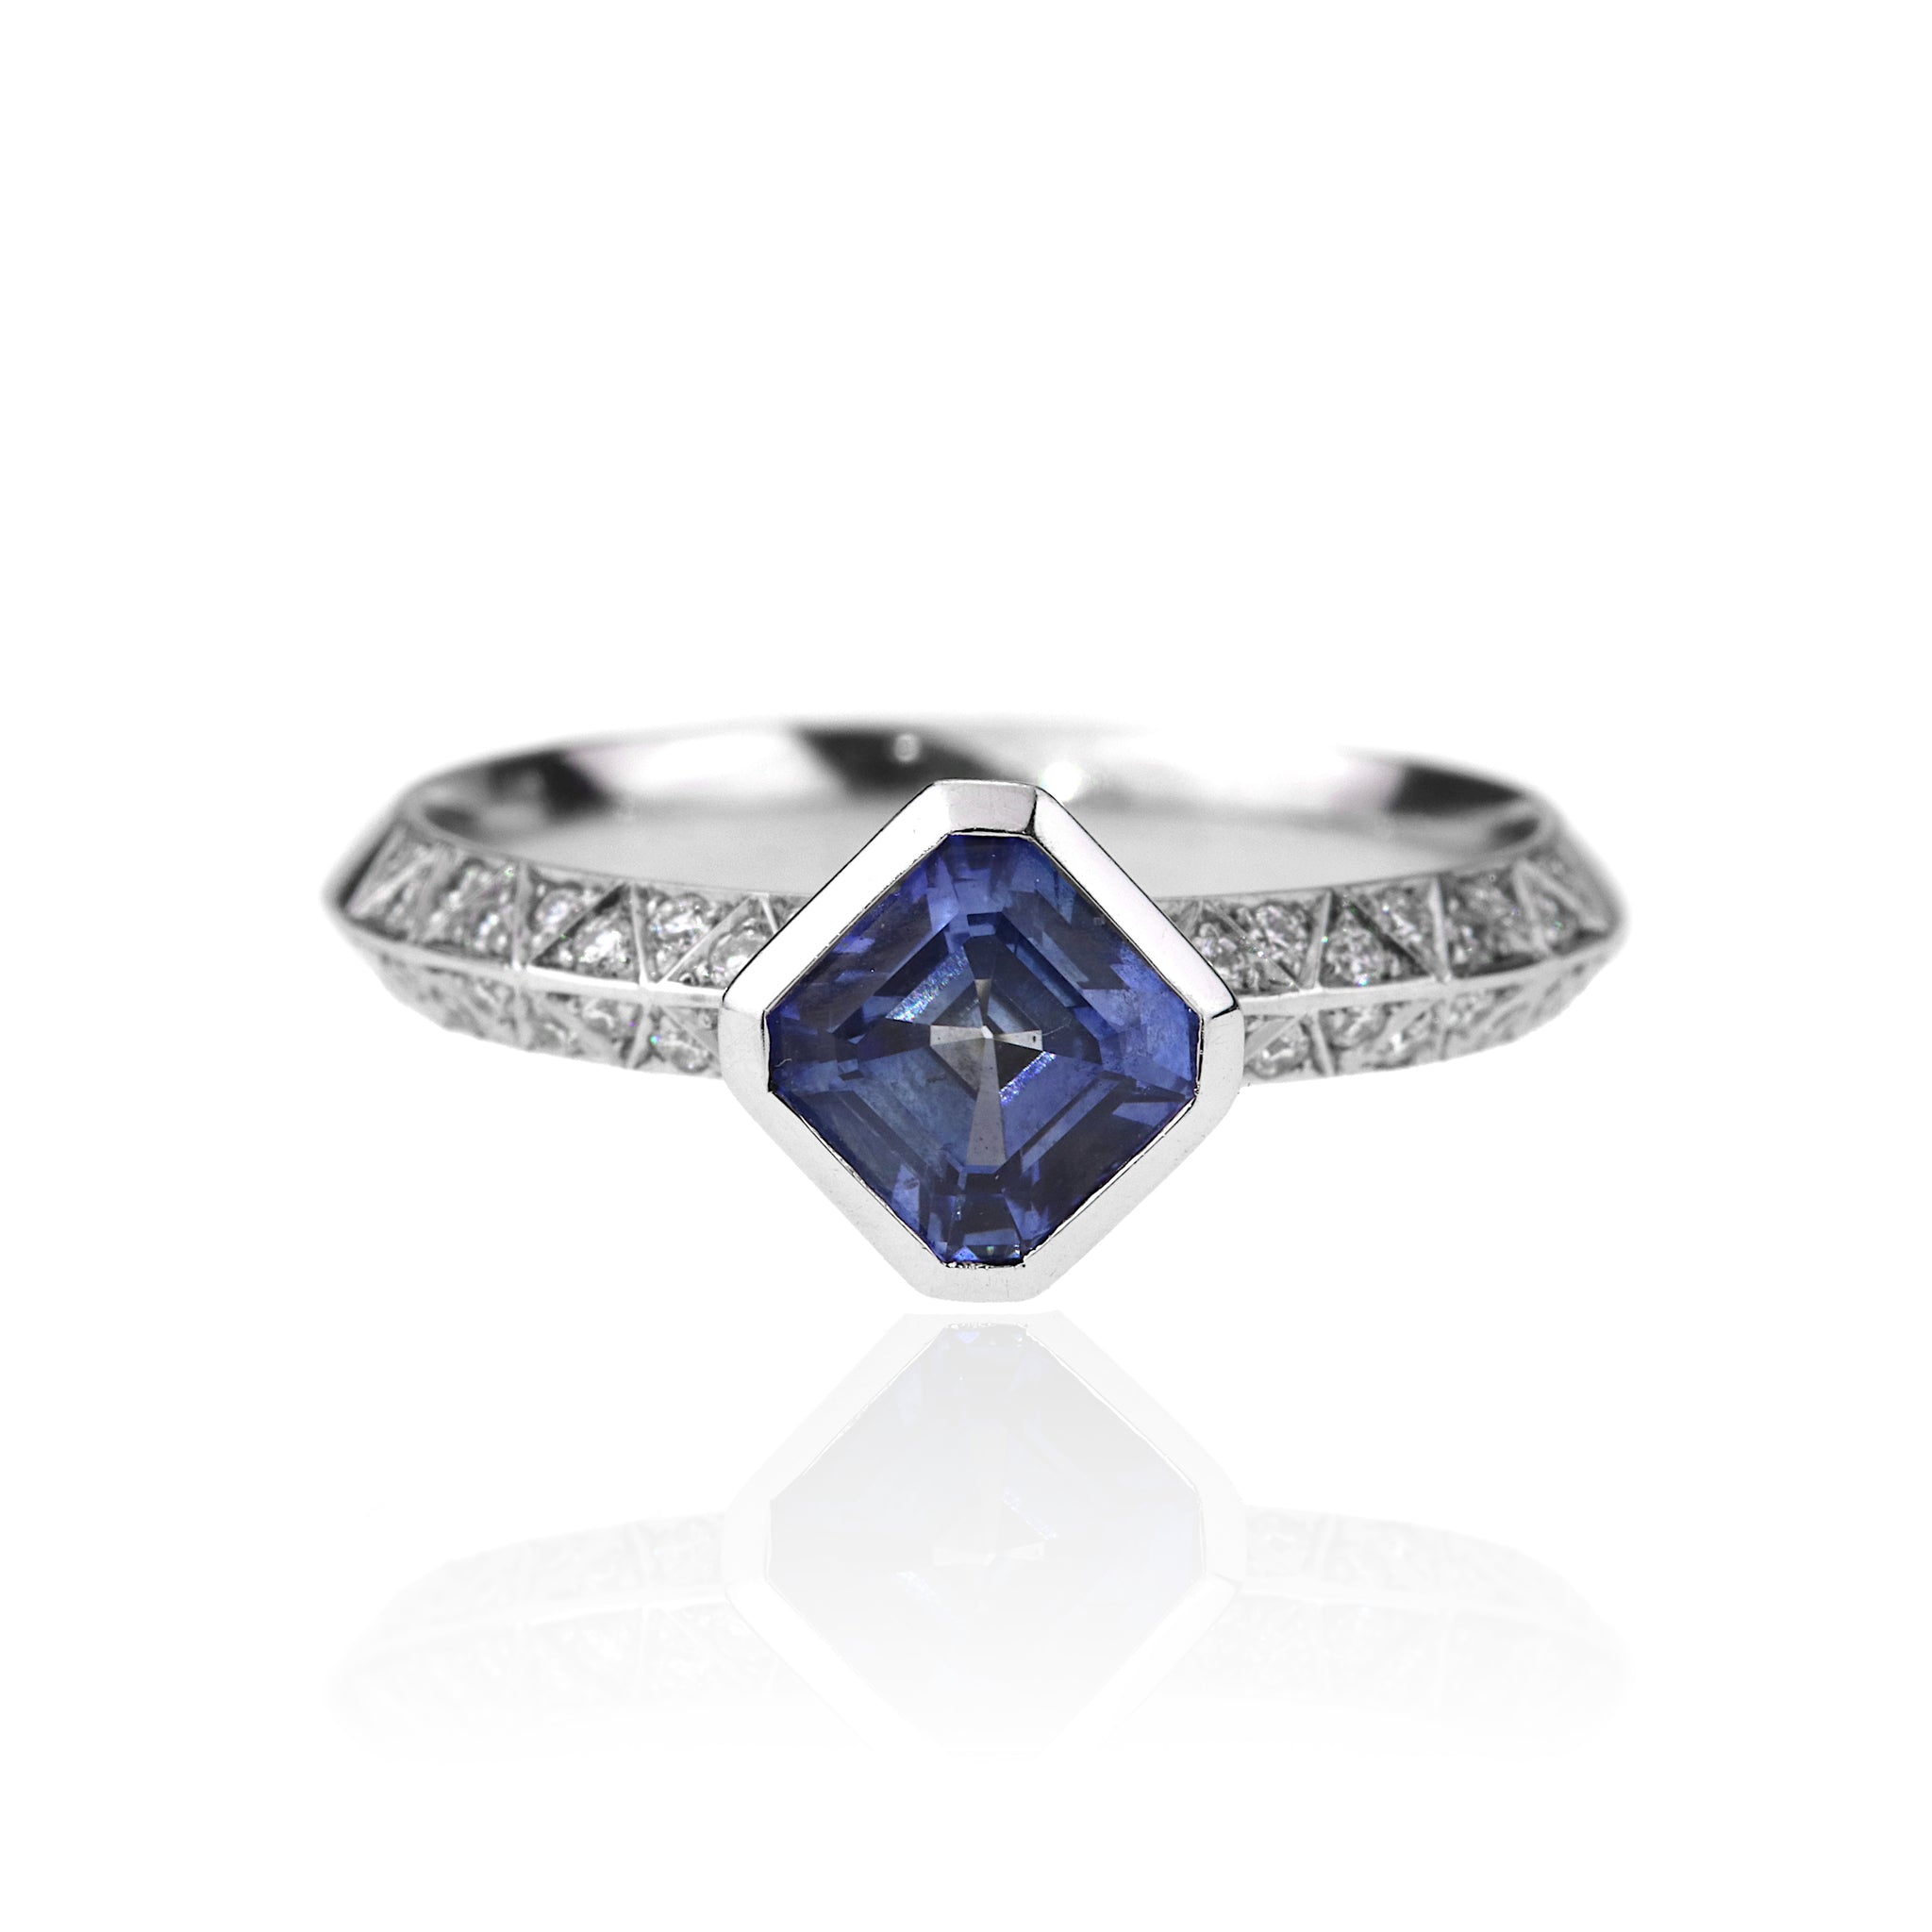 Asscher Cut Teal Sapphire Halo Engagement Ring | Exquisite Jewelry for  Every Occasion | FWCJ